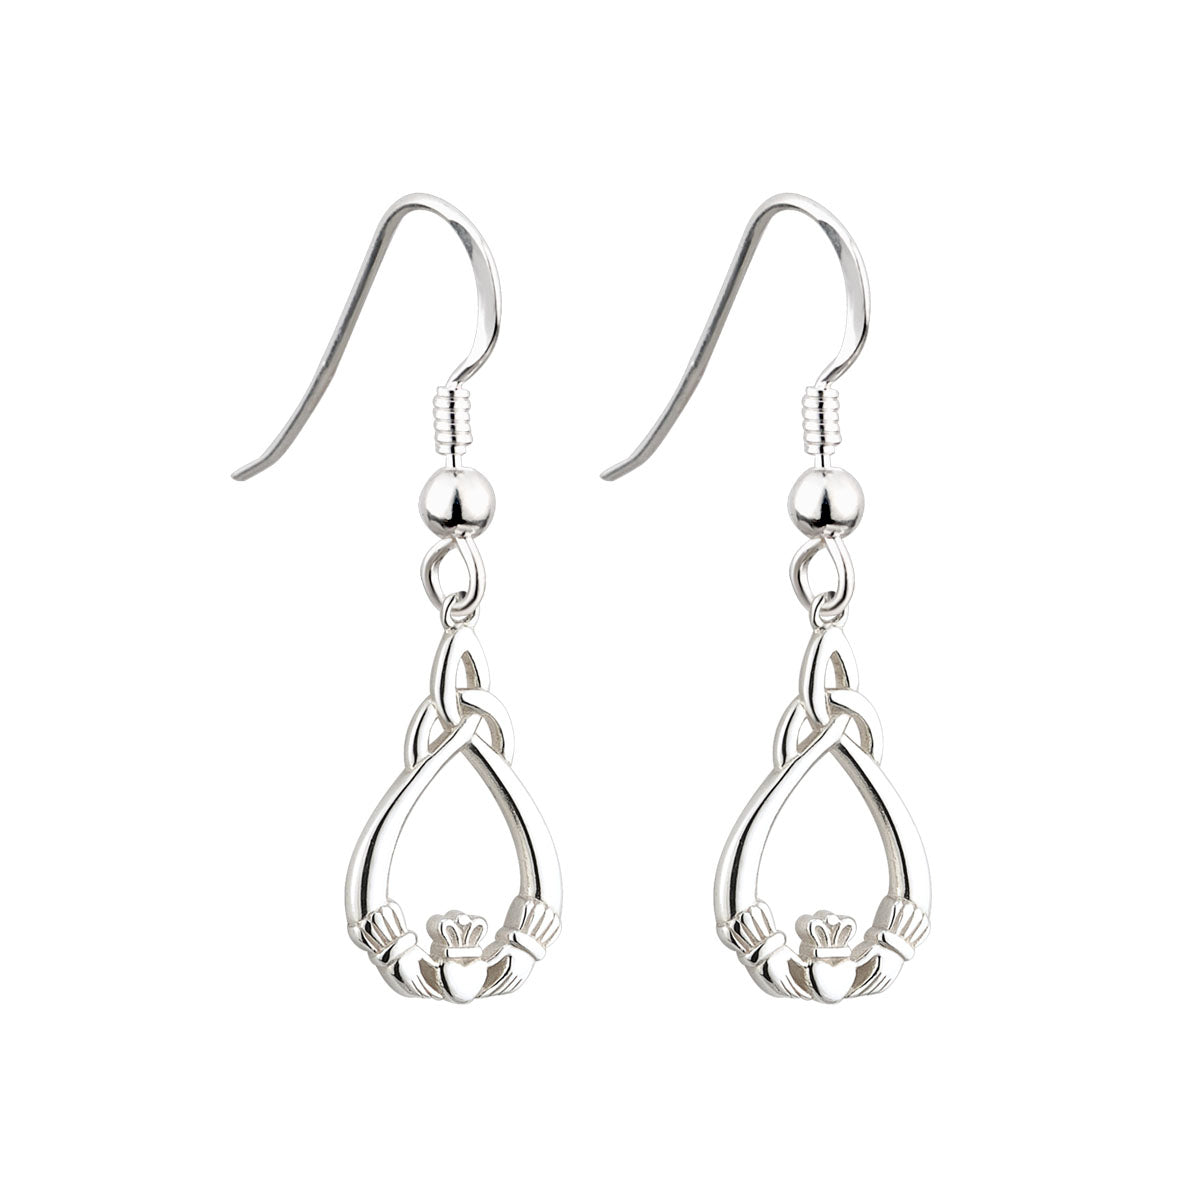 sterling silver claddagh trinity knot earrings s33178 from Solvar